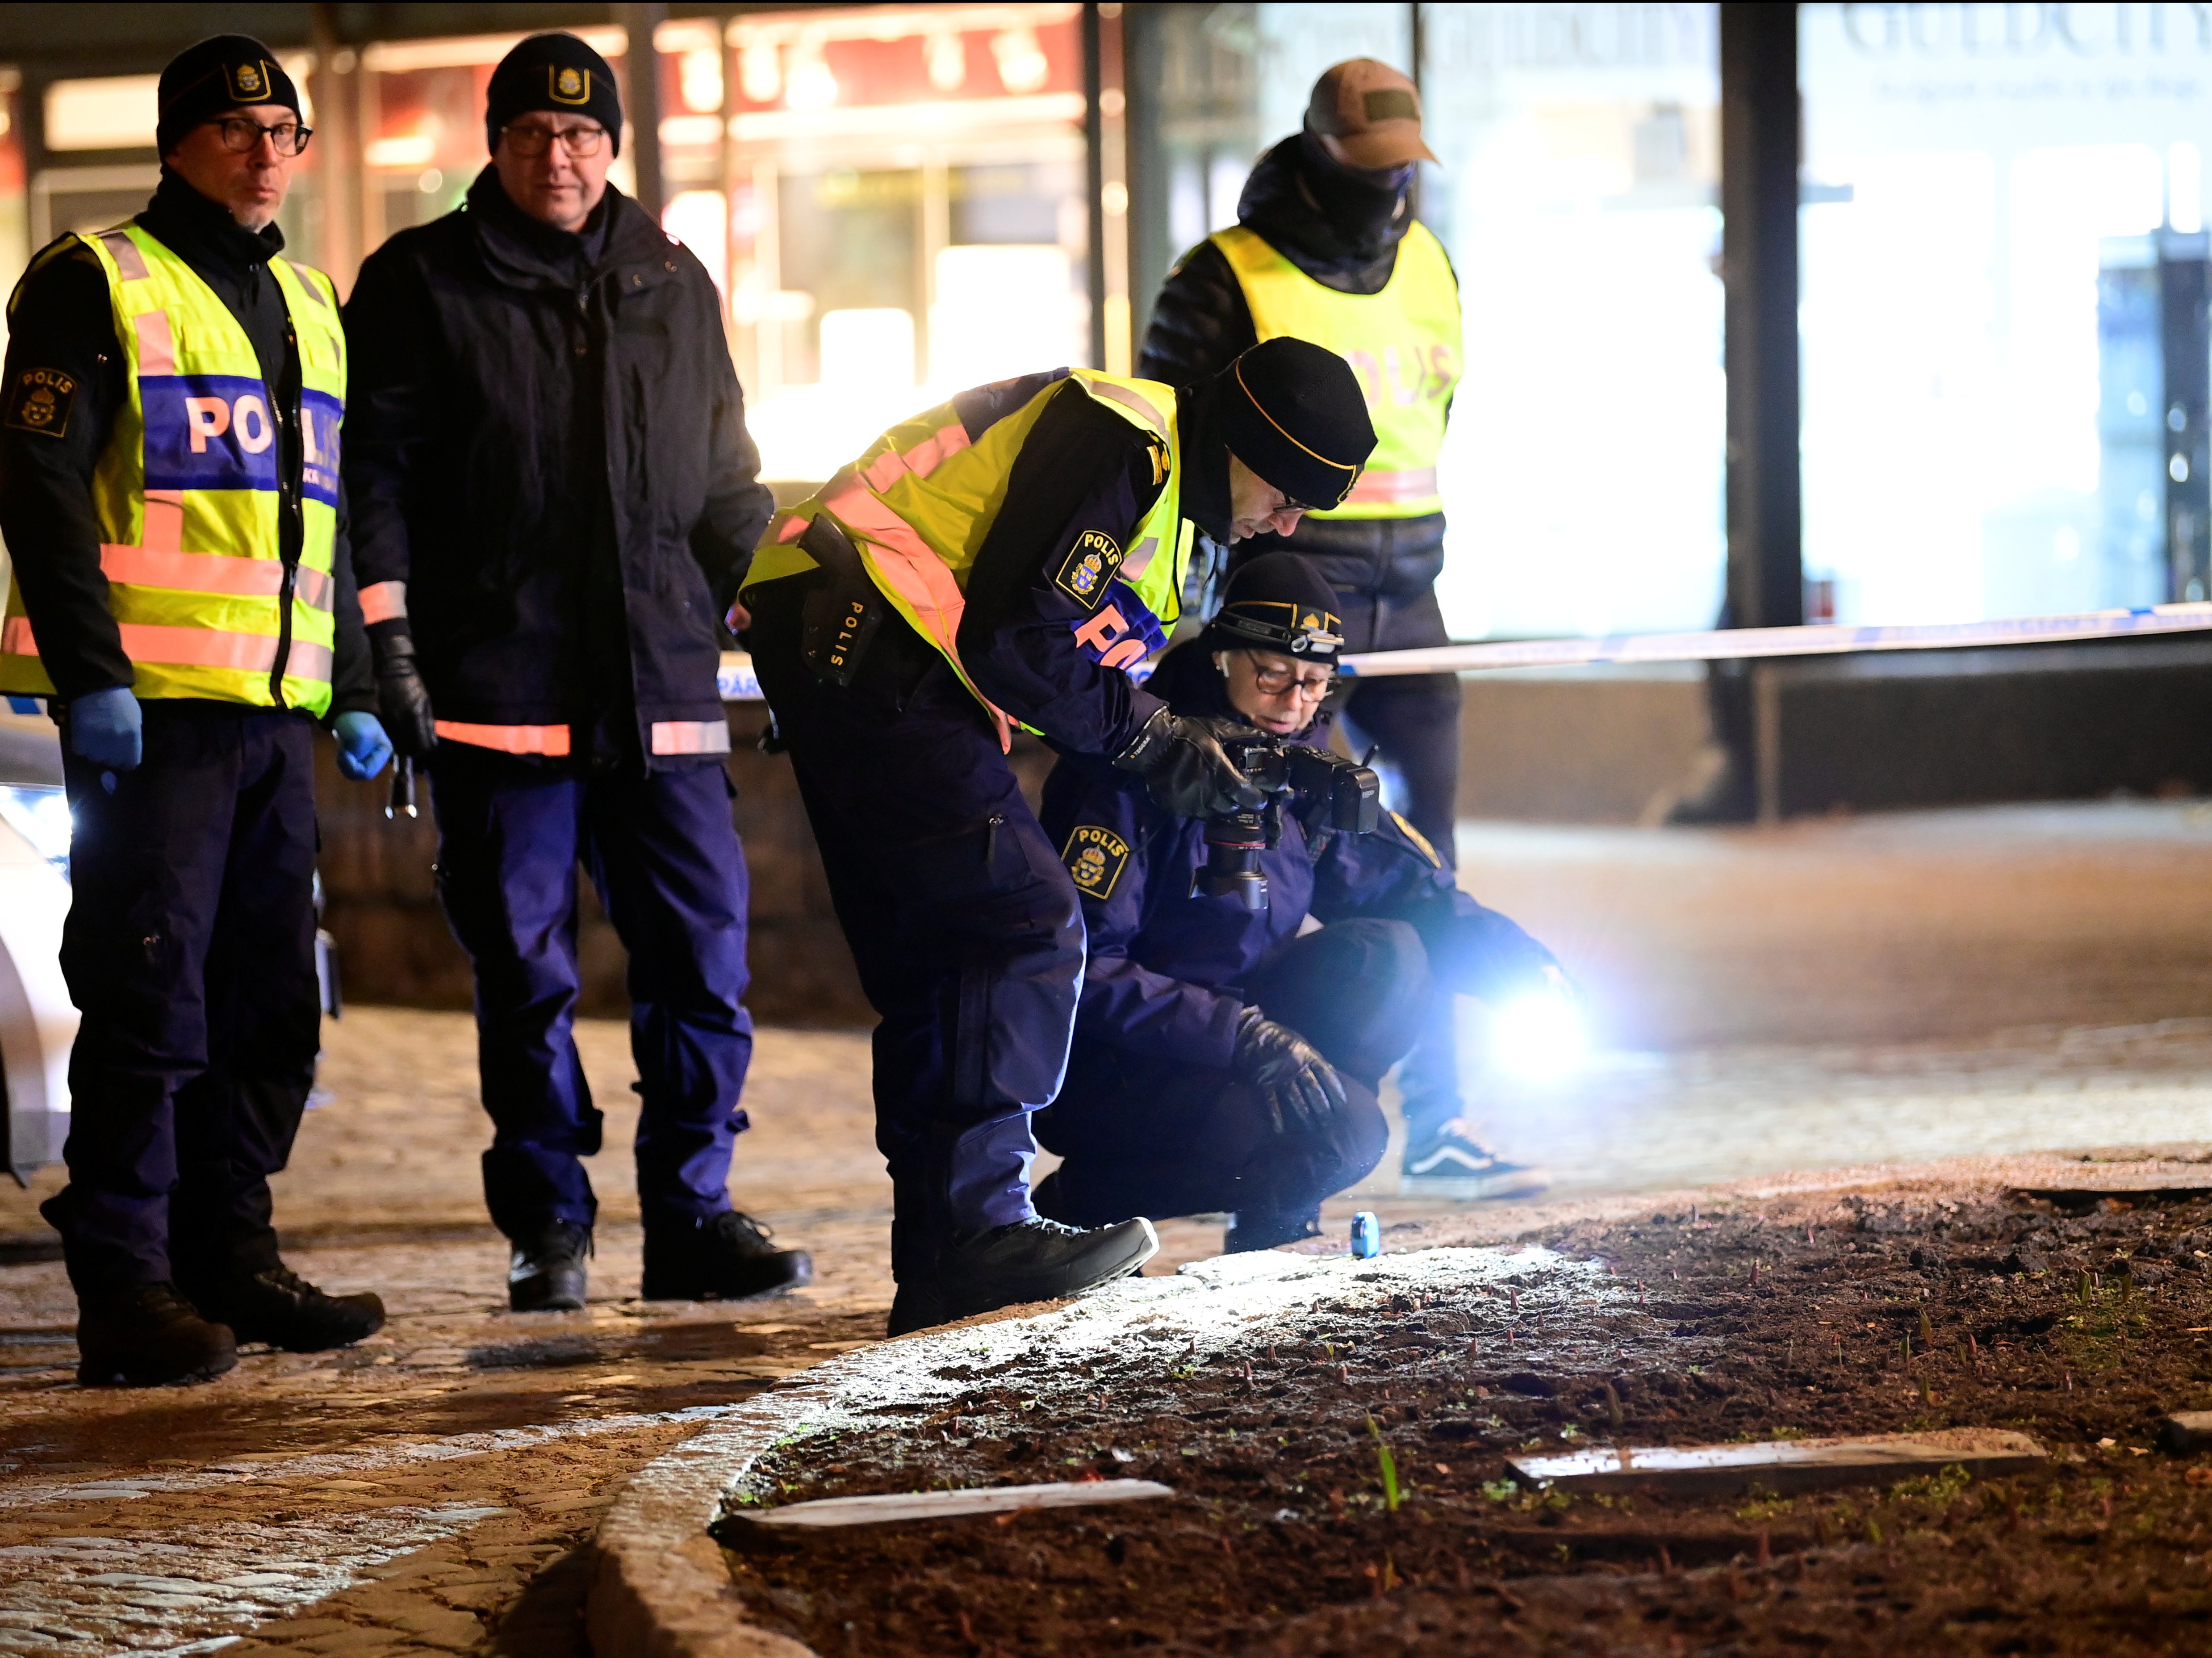 A man has been arrested following an attack in the Swedish town of Vetlanda